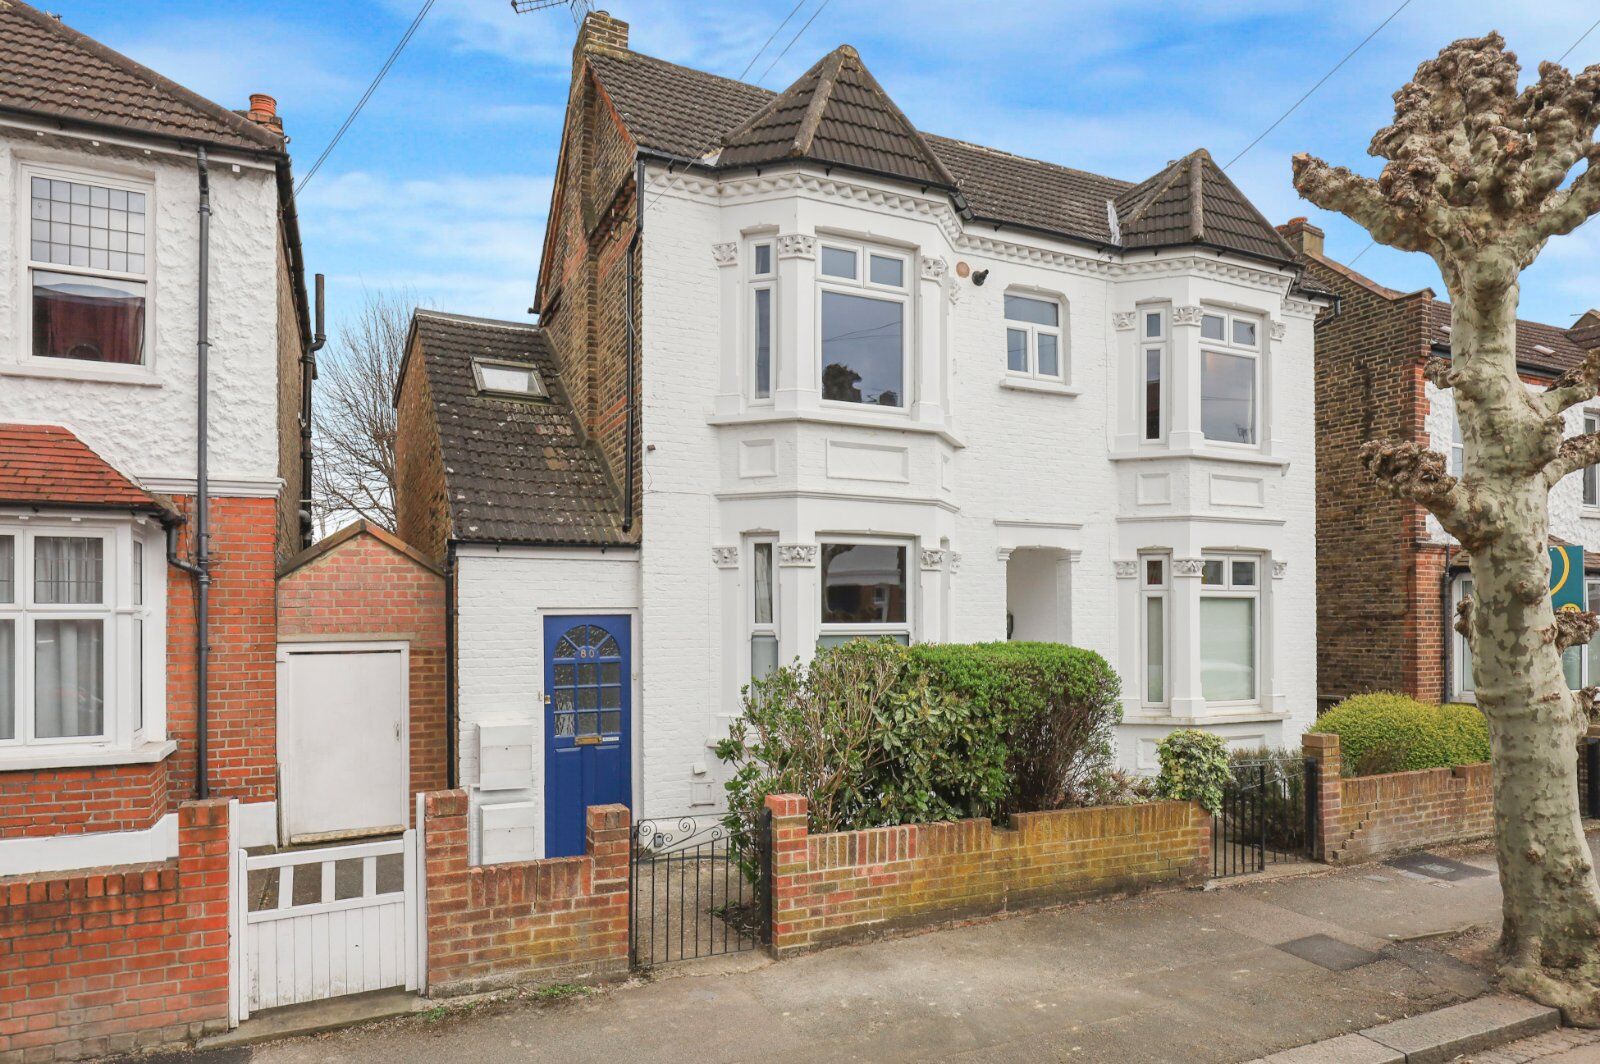 1 bedroom  flat for sale Southdown Road, Wimbledon, SW20, main image